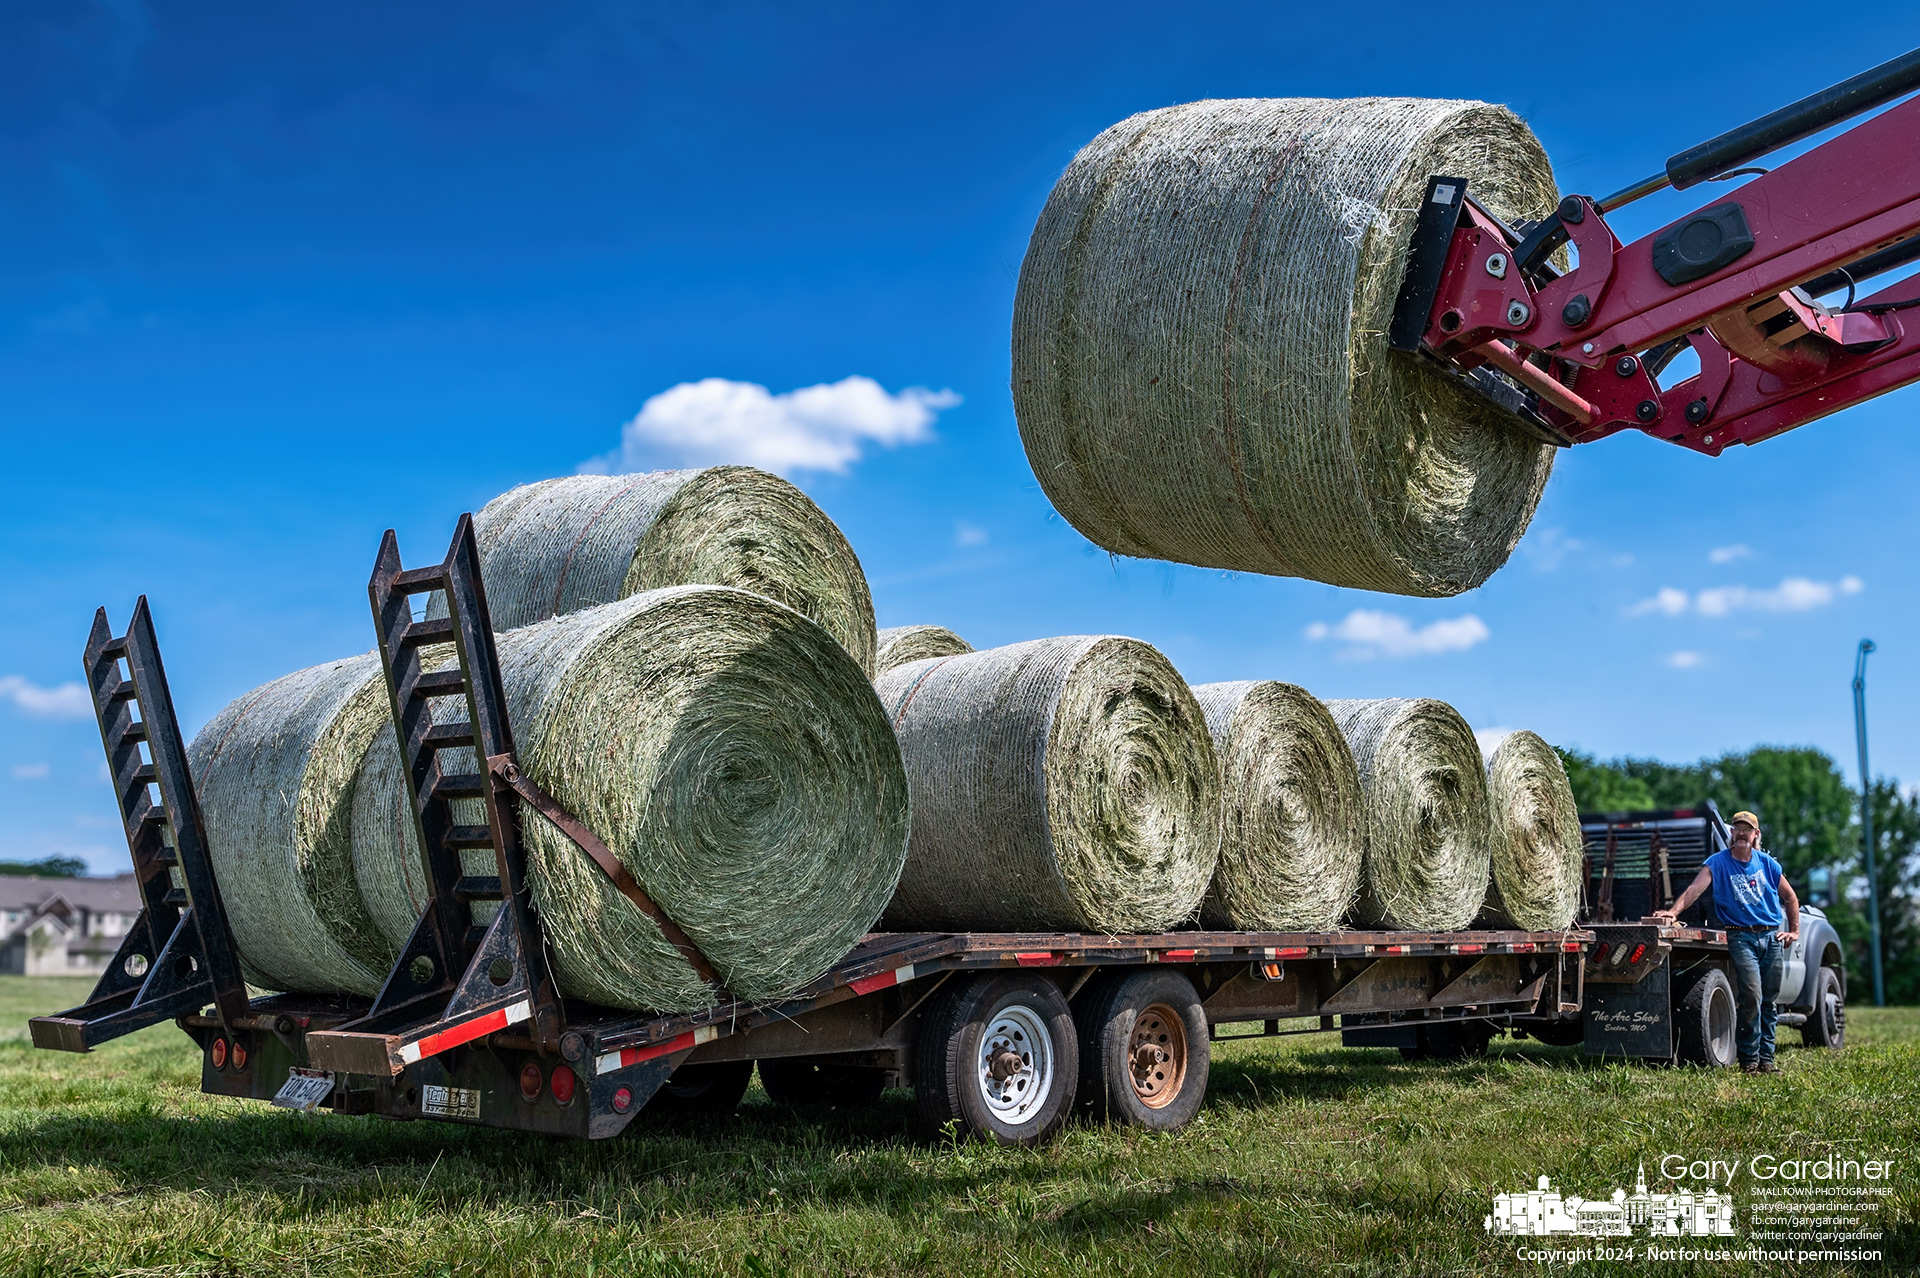 The last round hay bales harvested from the Otterbein field on Cooper Road is loaded onto a trailer to be put in barn storage for feeding cattle. My Final Photo for May 20, 2024.